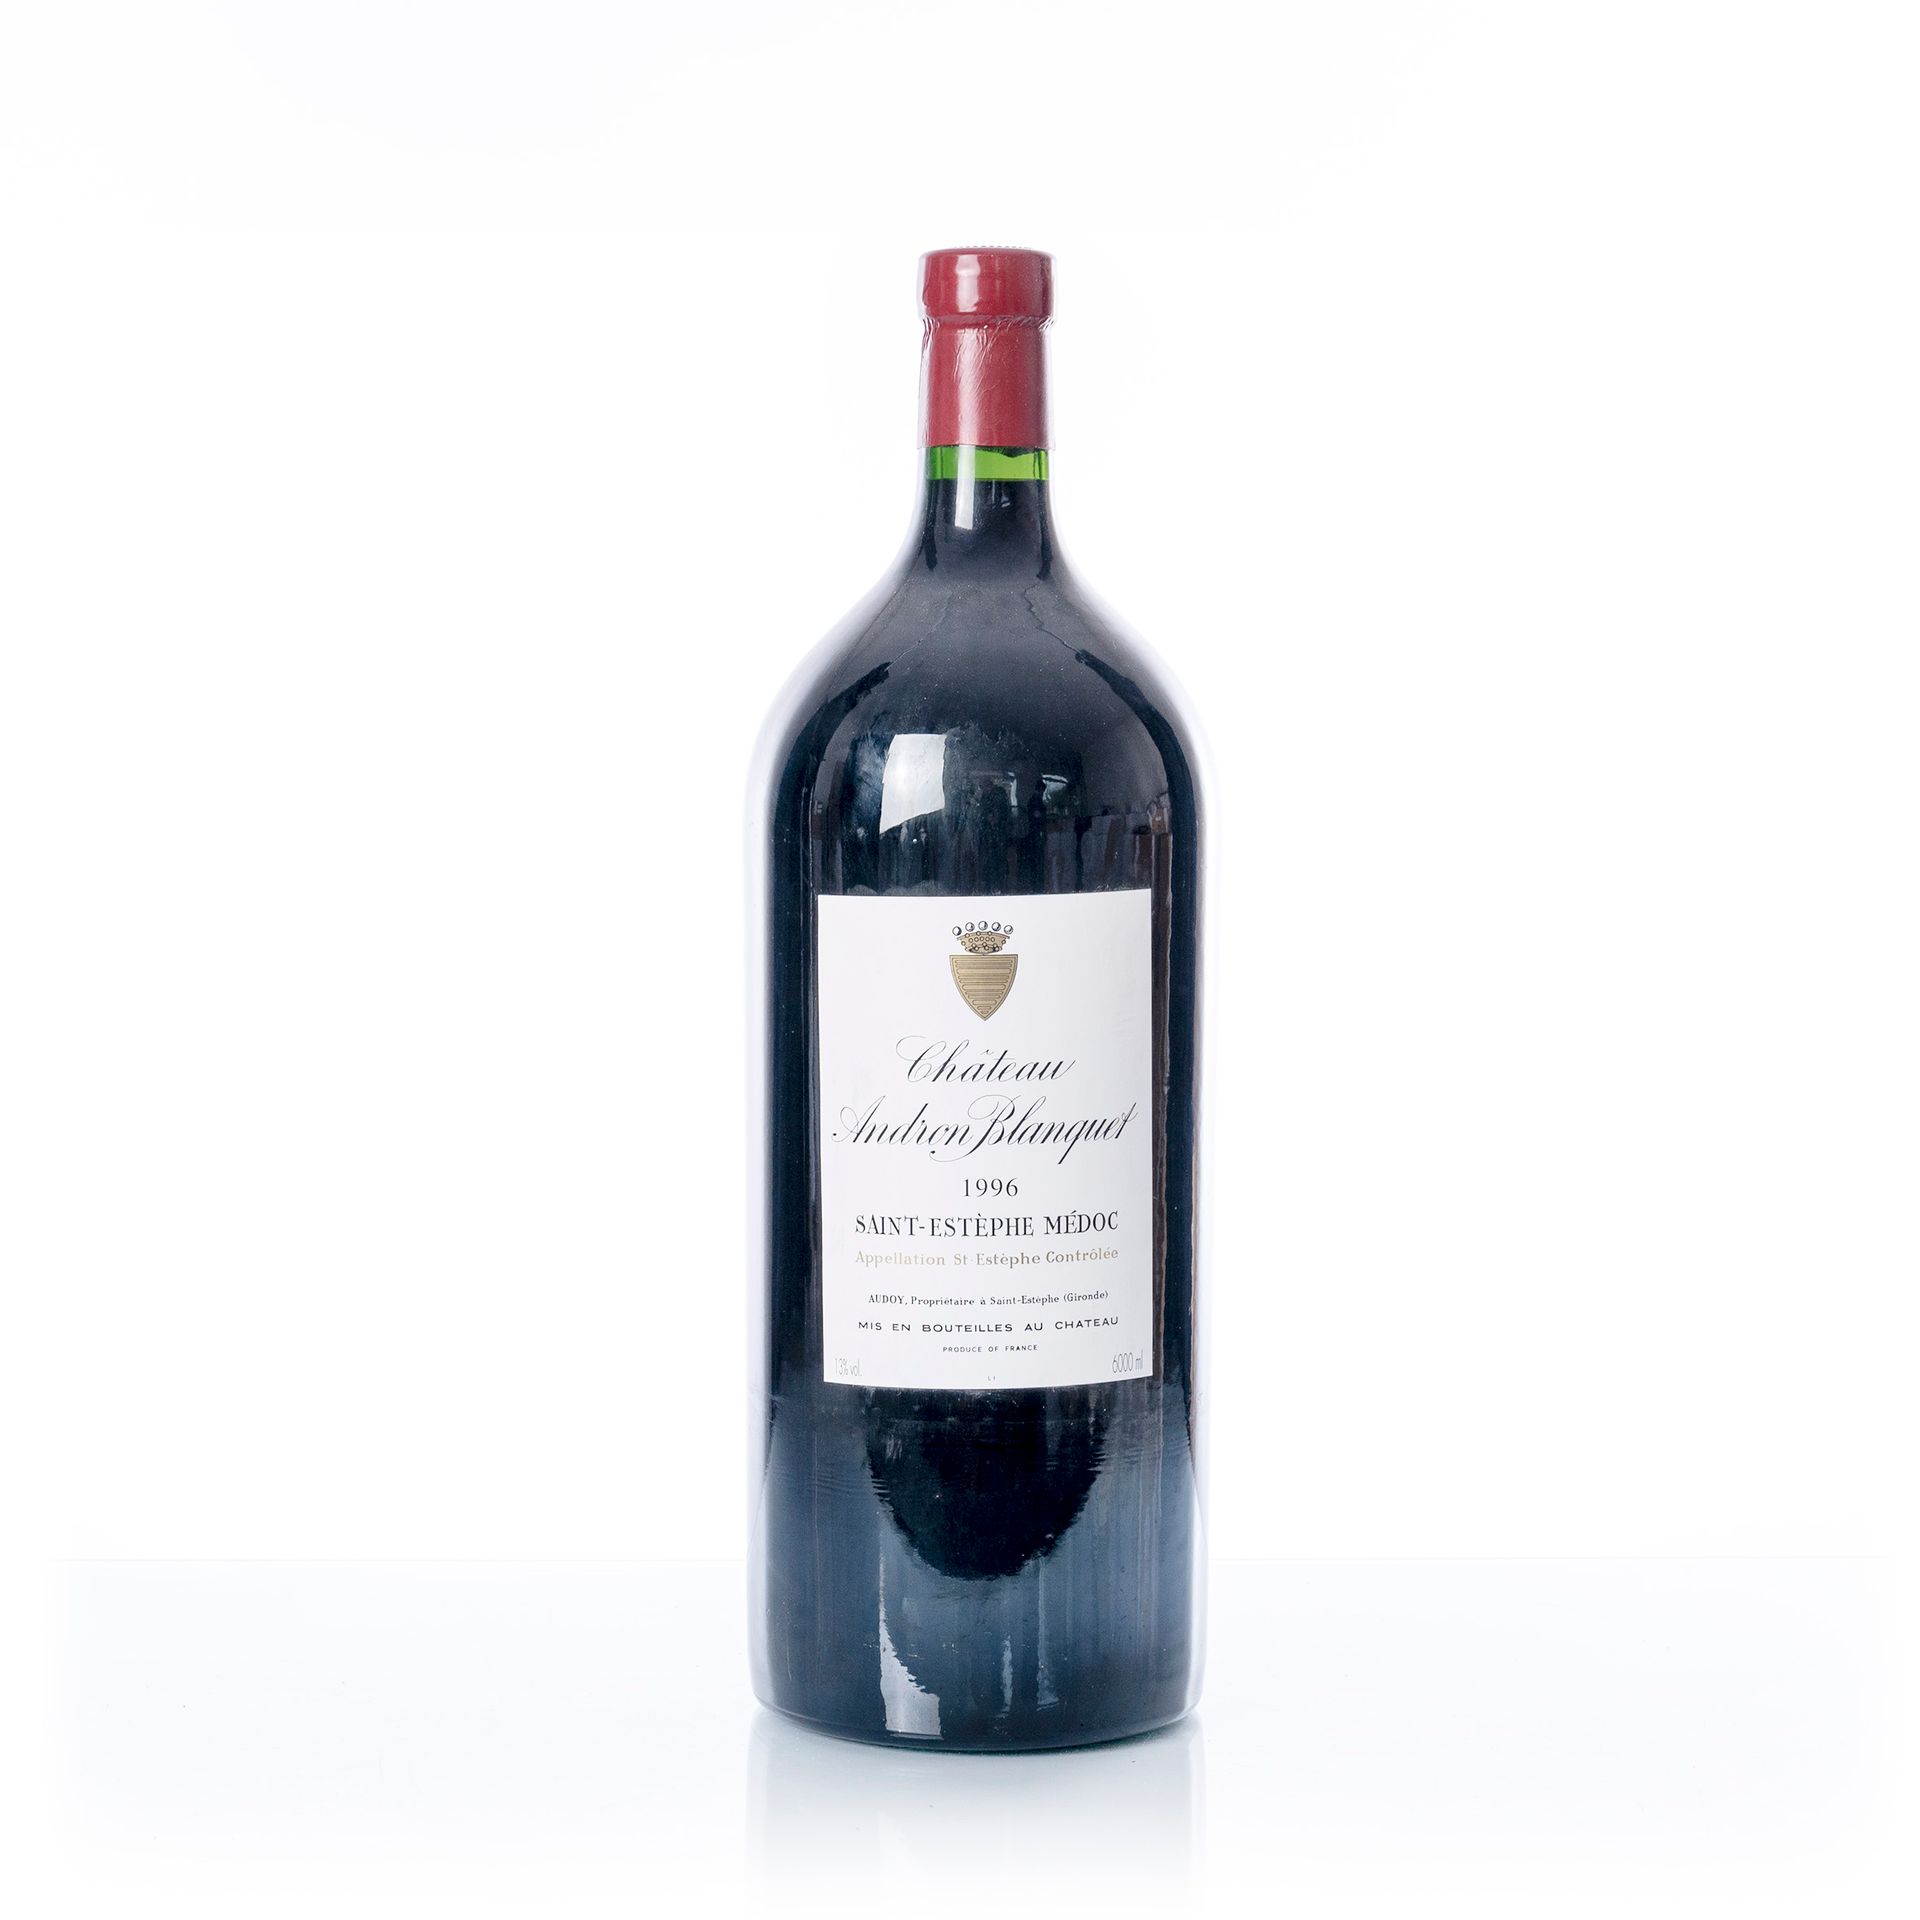 Null 1 imperial (6L.) CHÂTEAU ANDRON BLANQUET

Year : 1996

Appellation : SAINT-&hellip;